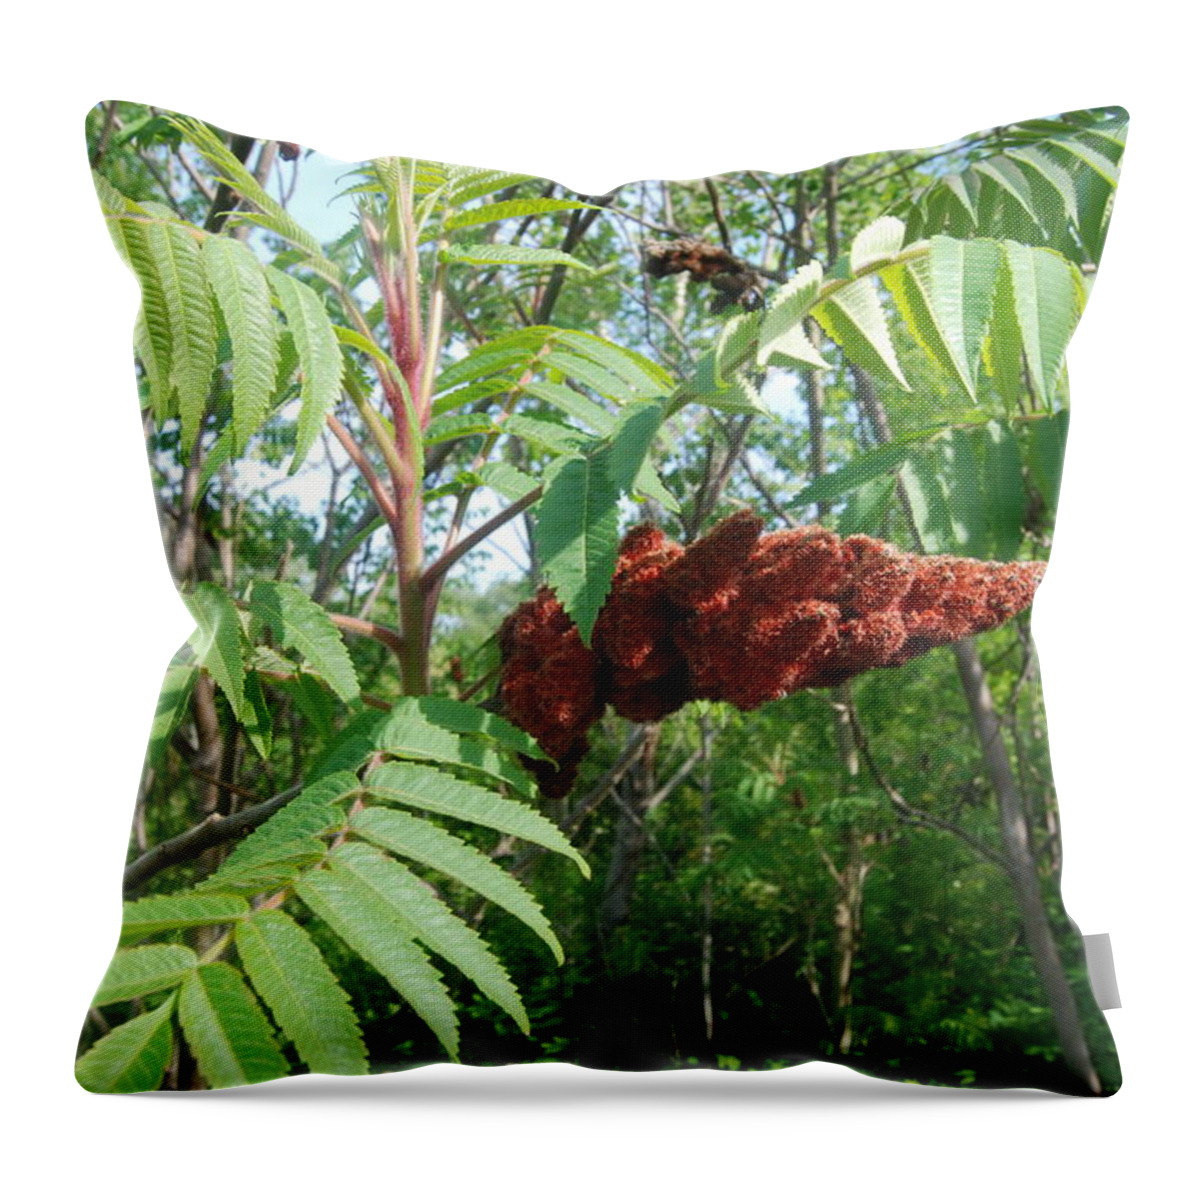 Staghorn Sumac Tree Throw Pillow featuring the photograph The Staghorn Sumac Tree by Ee Photography